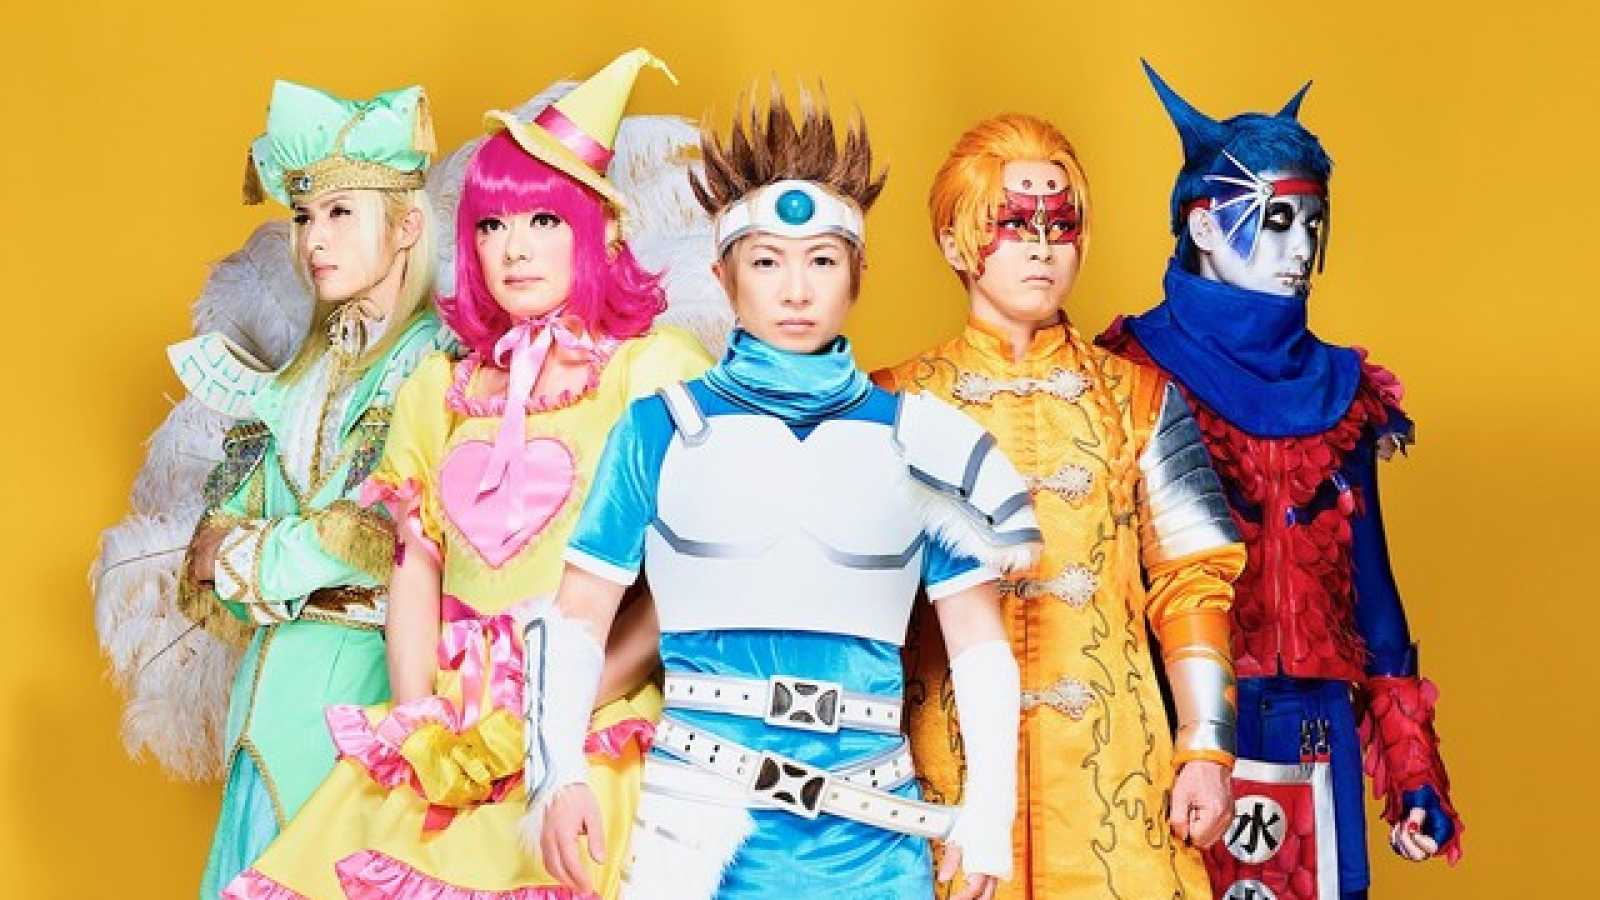 Psycho le Cému Announces No-Audience Live Streaming Concert © Psycho le Cemu. All rights reserved.